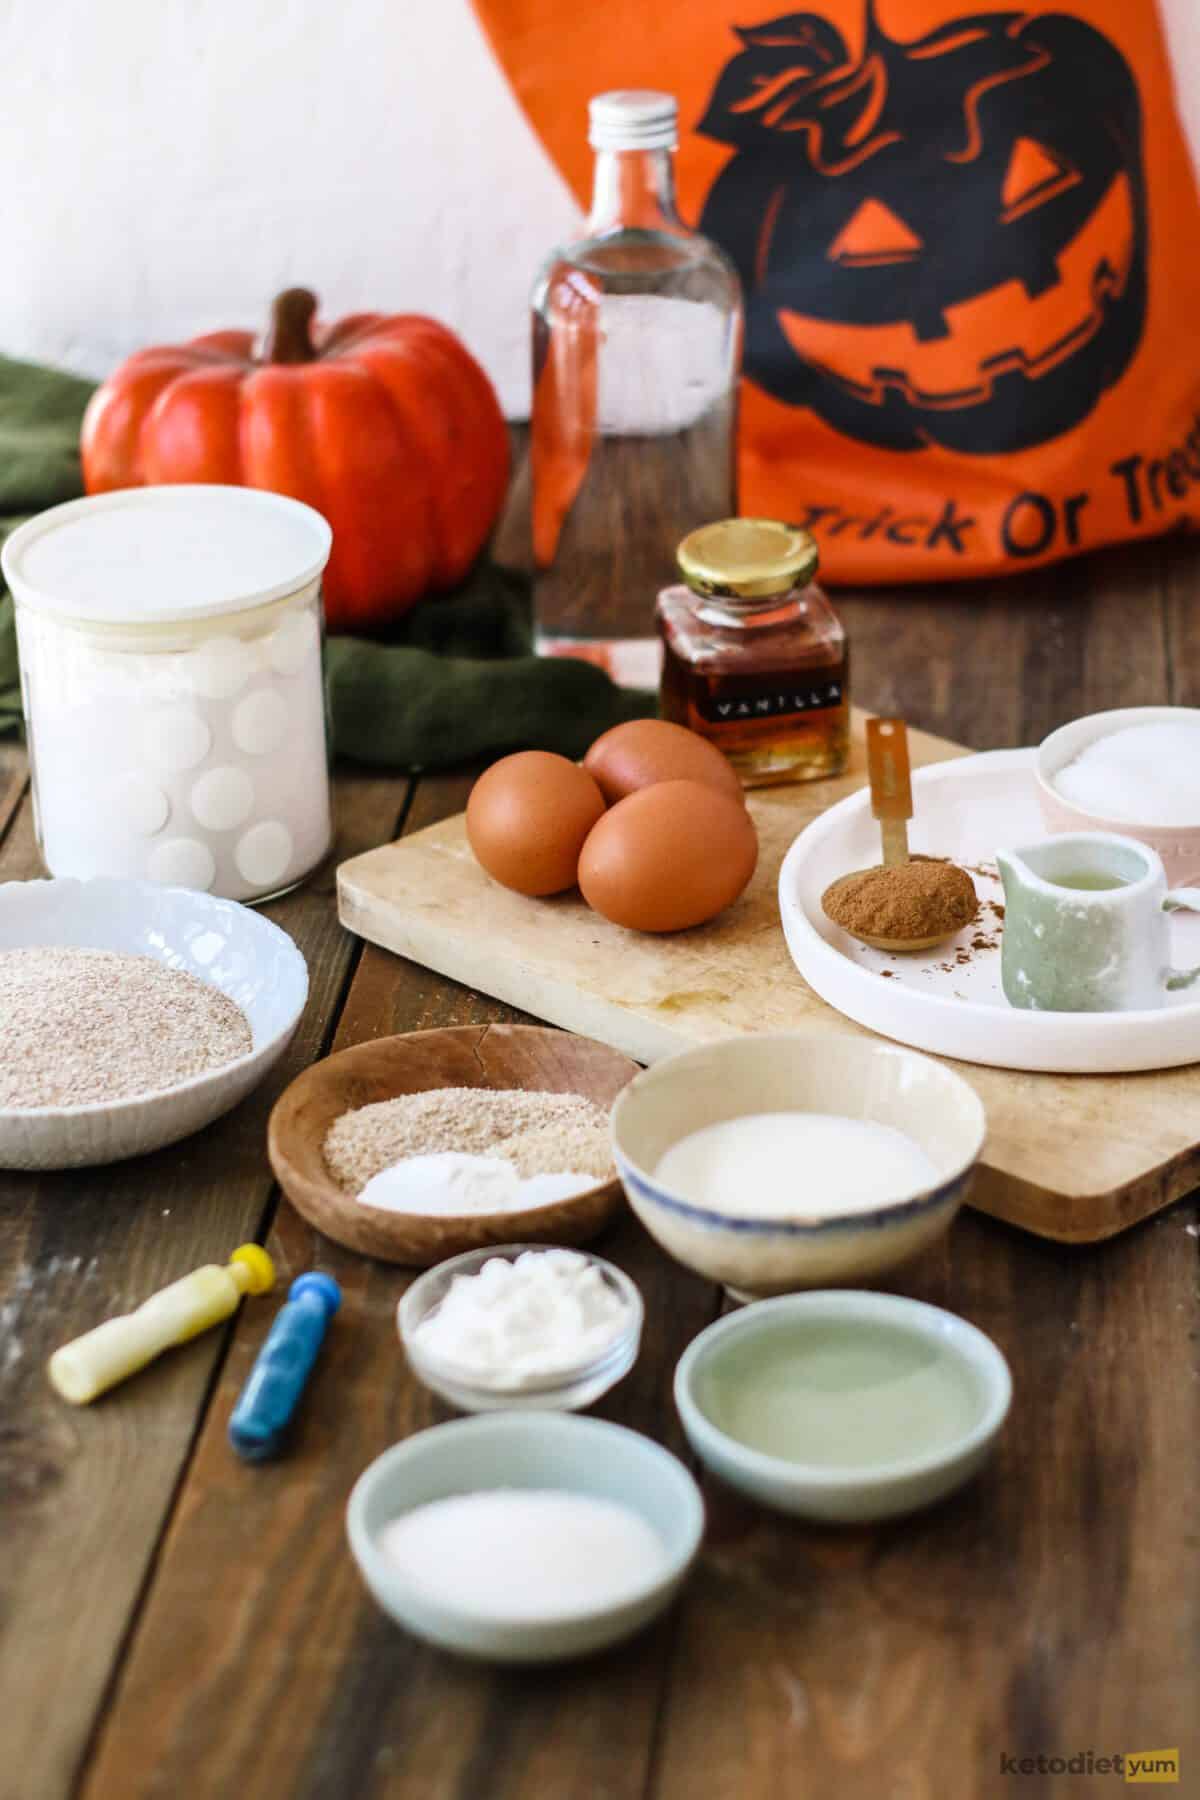 Plates, bowls and a chopping board with ingredients on a table with Halloween decorations